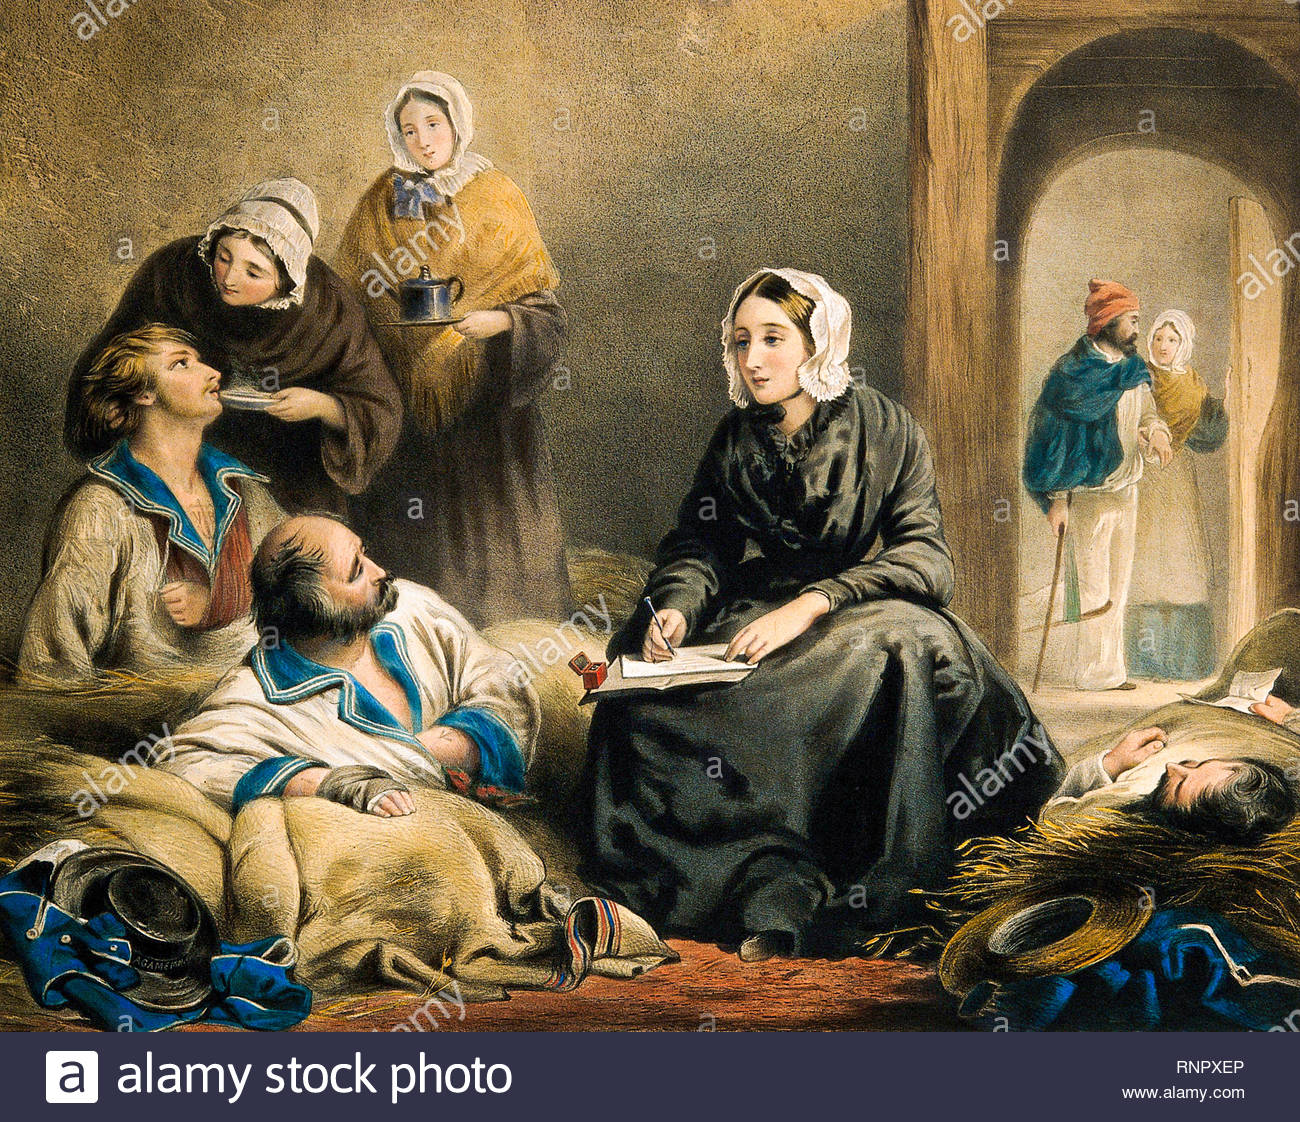 The Work Of Florence Nightingale High Resolution Stock Photography